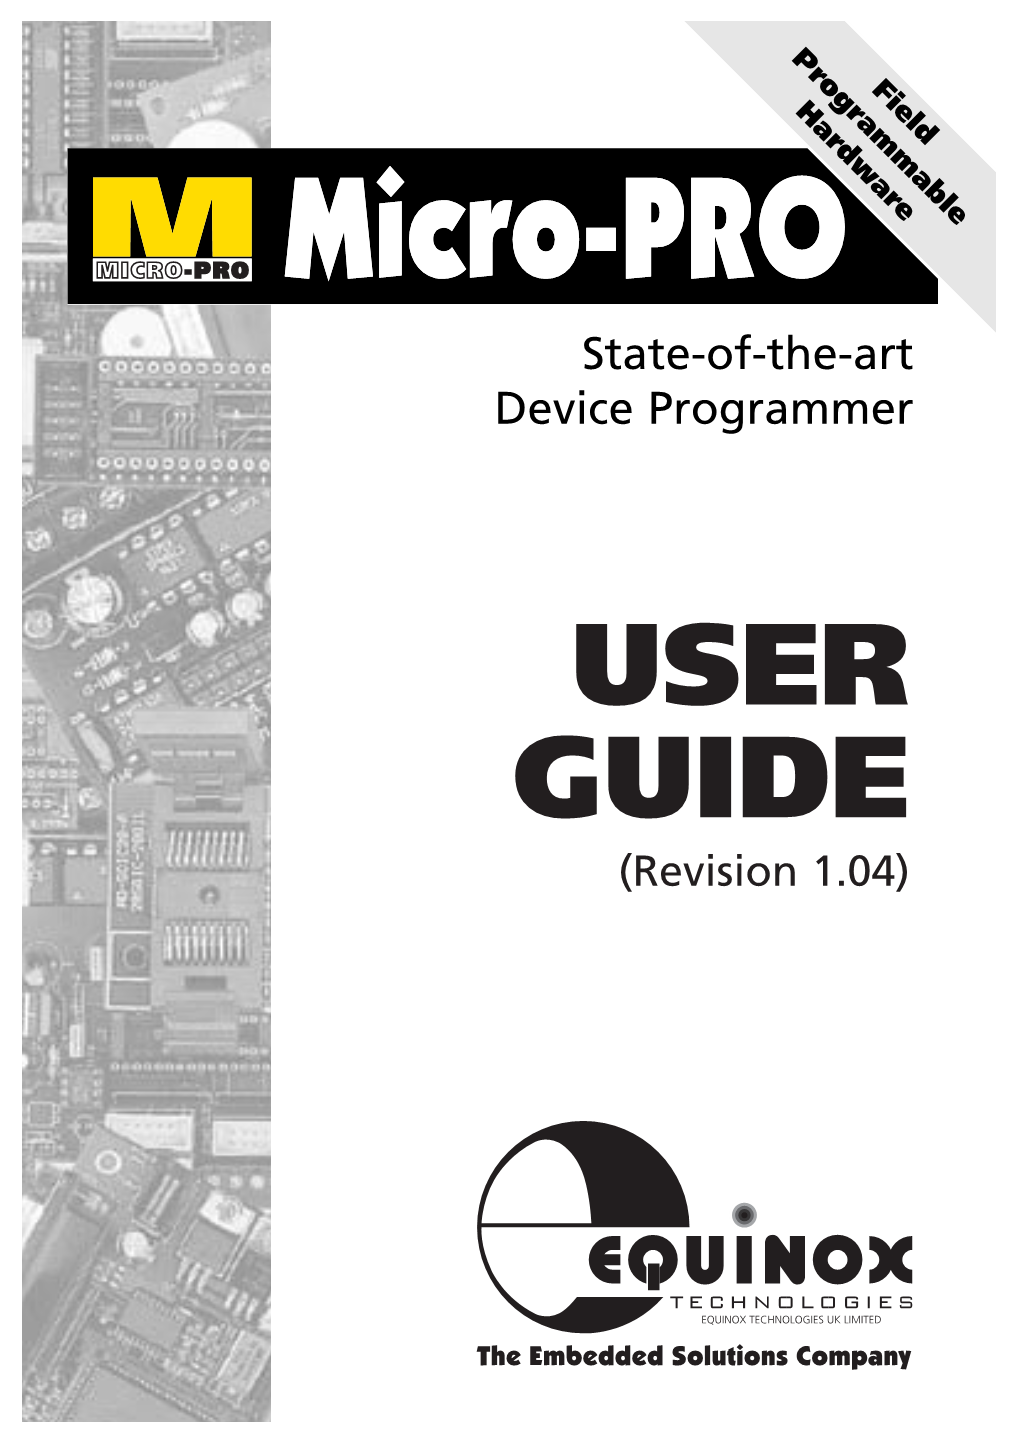 USER GUIDE (Revision 1.04) Micro-Pro User Guide V1.04 Copyright Information